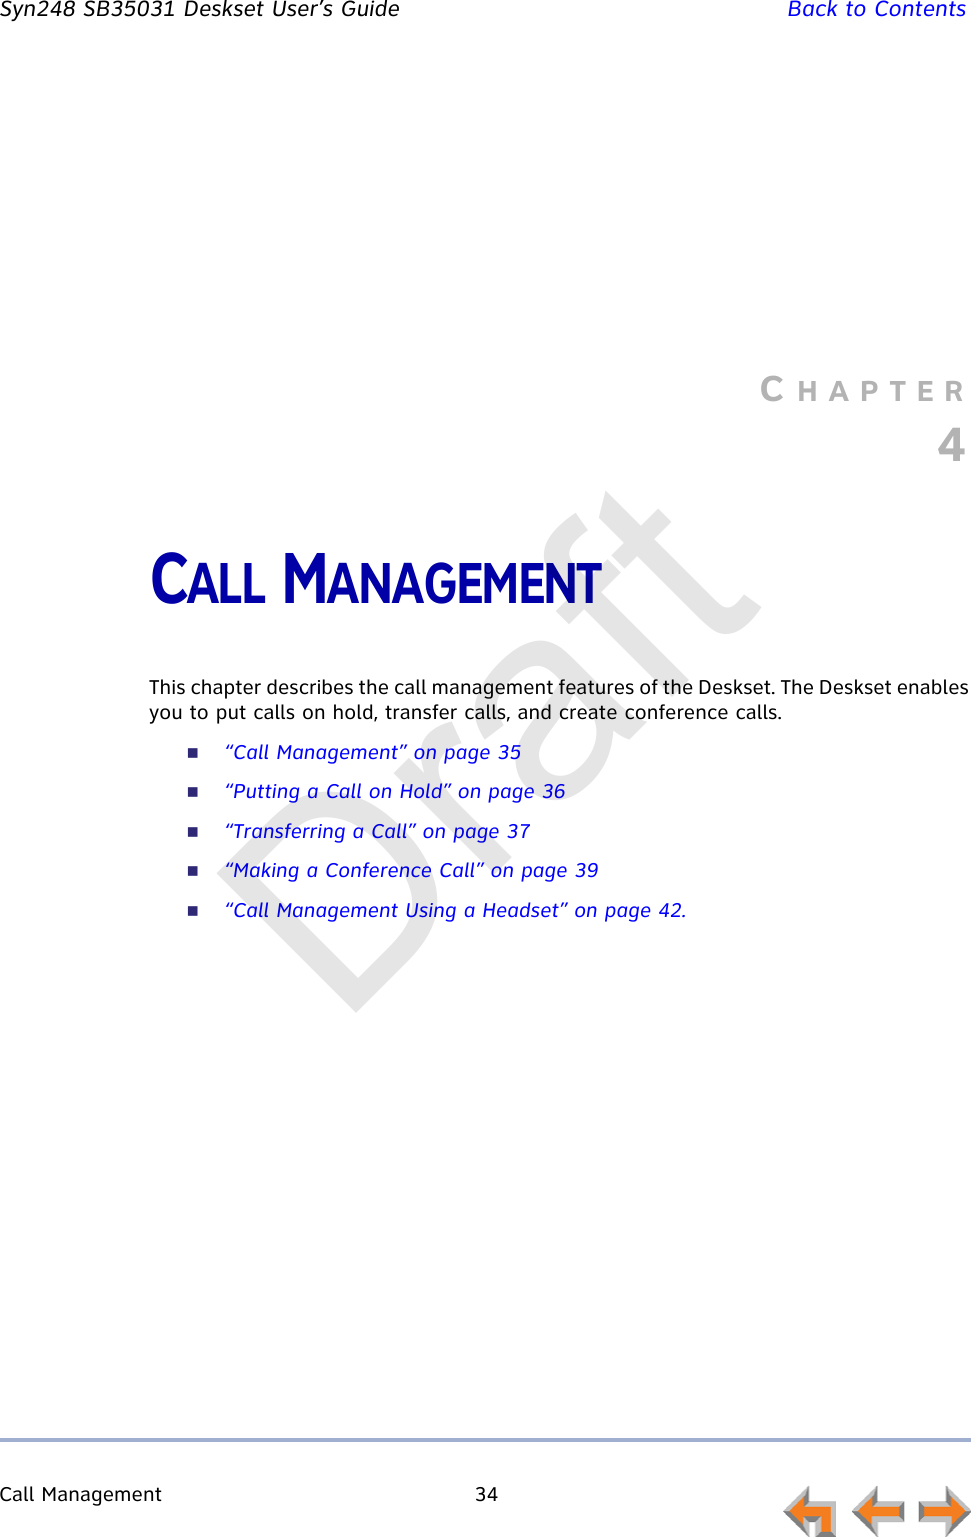 Call Management 34         Syn248 SB35031 Deskset User’s Guide Back to ContentsCHAPTER4CALL MANAGEMENTThis chapter describes the call management features of the Deskset. The Deskset enables you to put calls on hold, transfer calls, and create conference calls.“Call Management” on page 35“Putting a Call on Hold” on page 36“Transferring a Call” on page 37“Making a Conference Call” on page 39“Call Management Using a Headset” on page 42.Draft